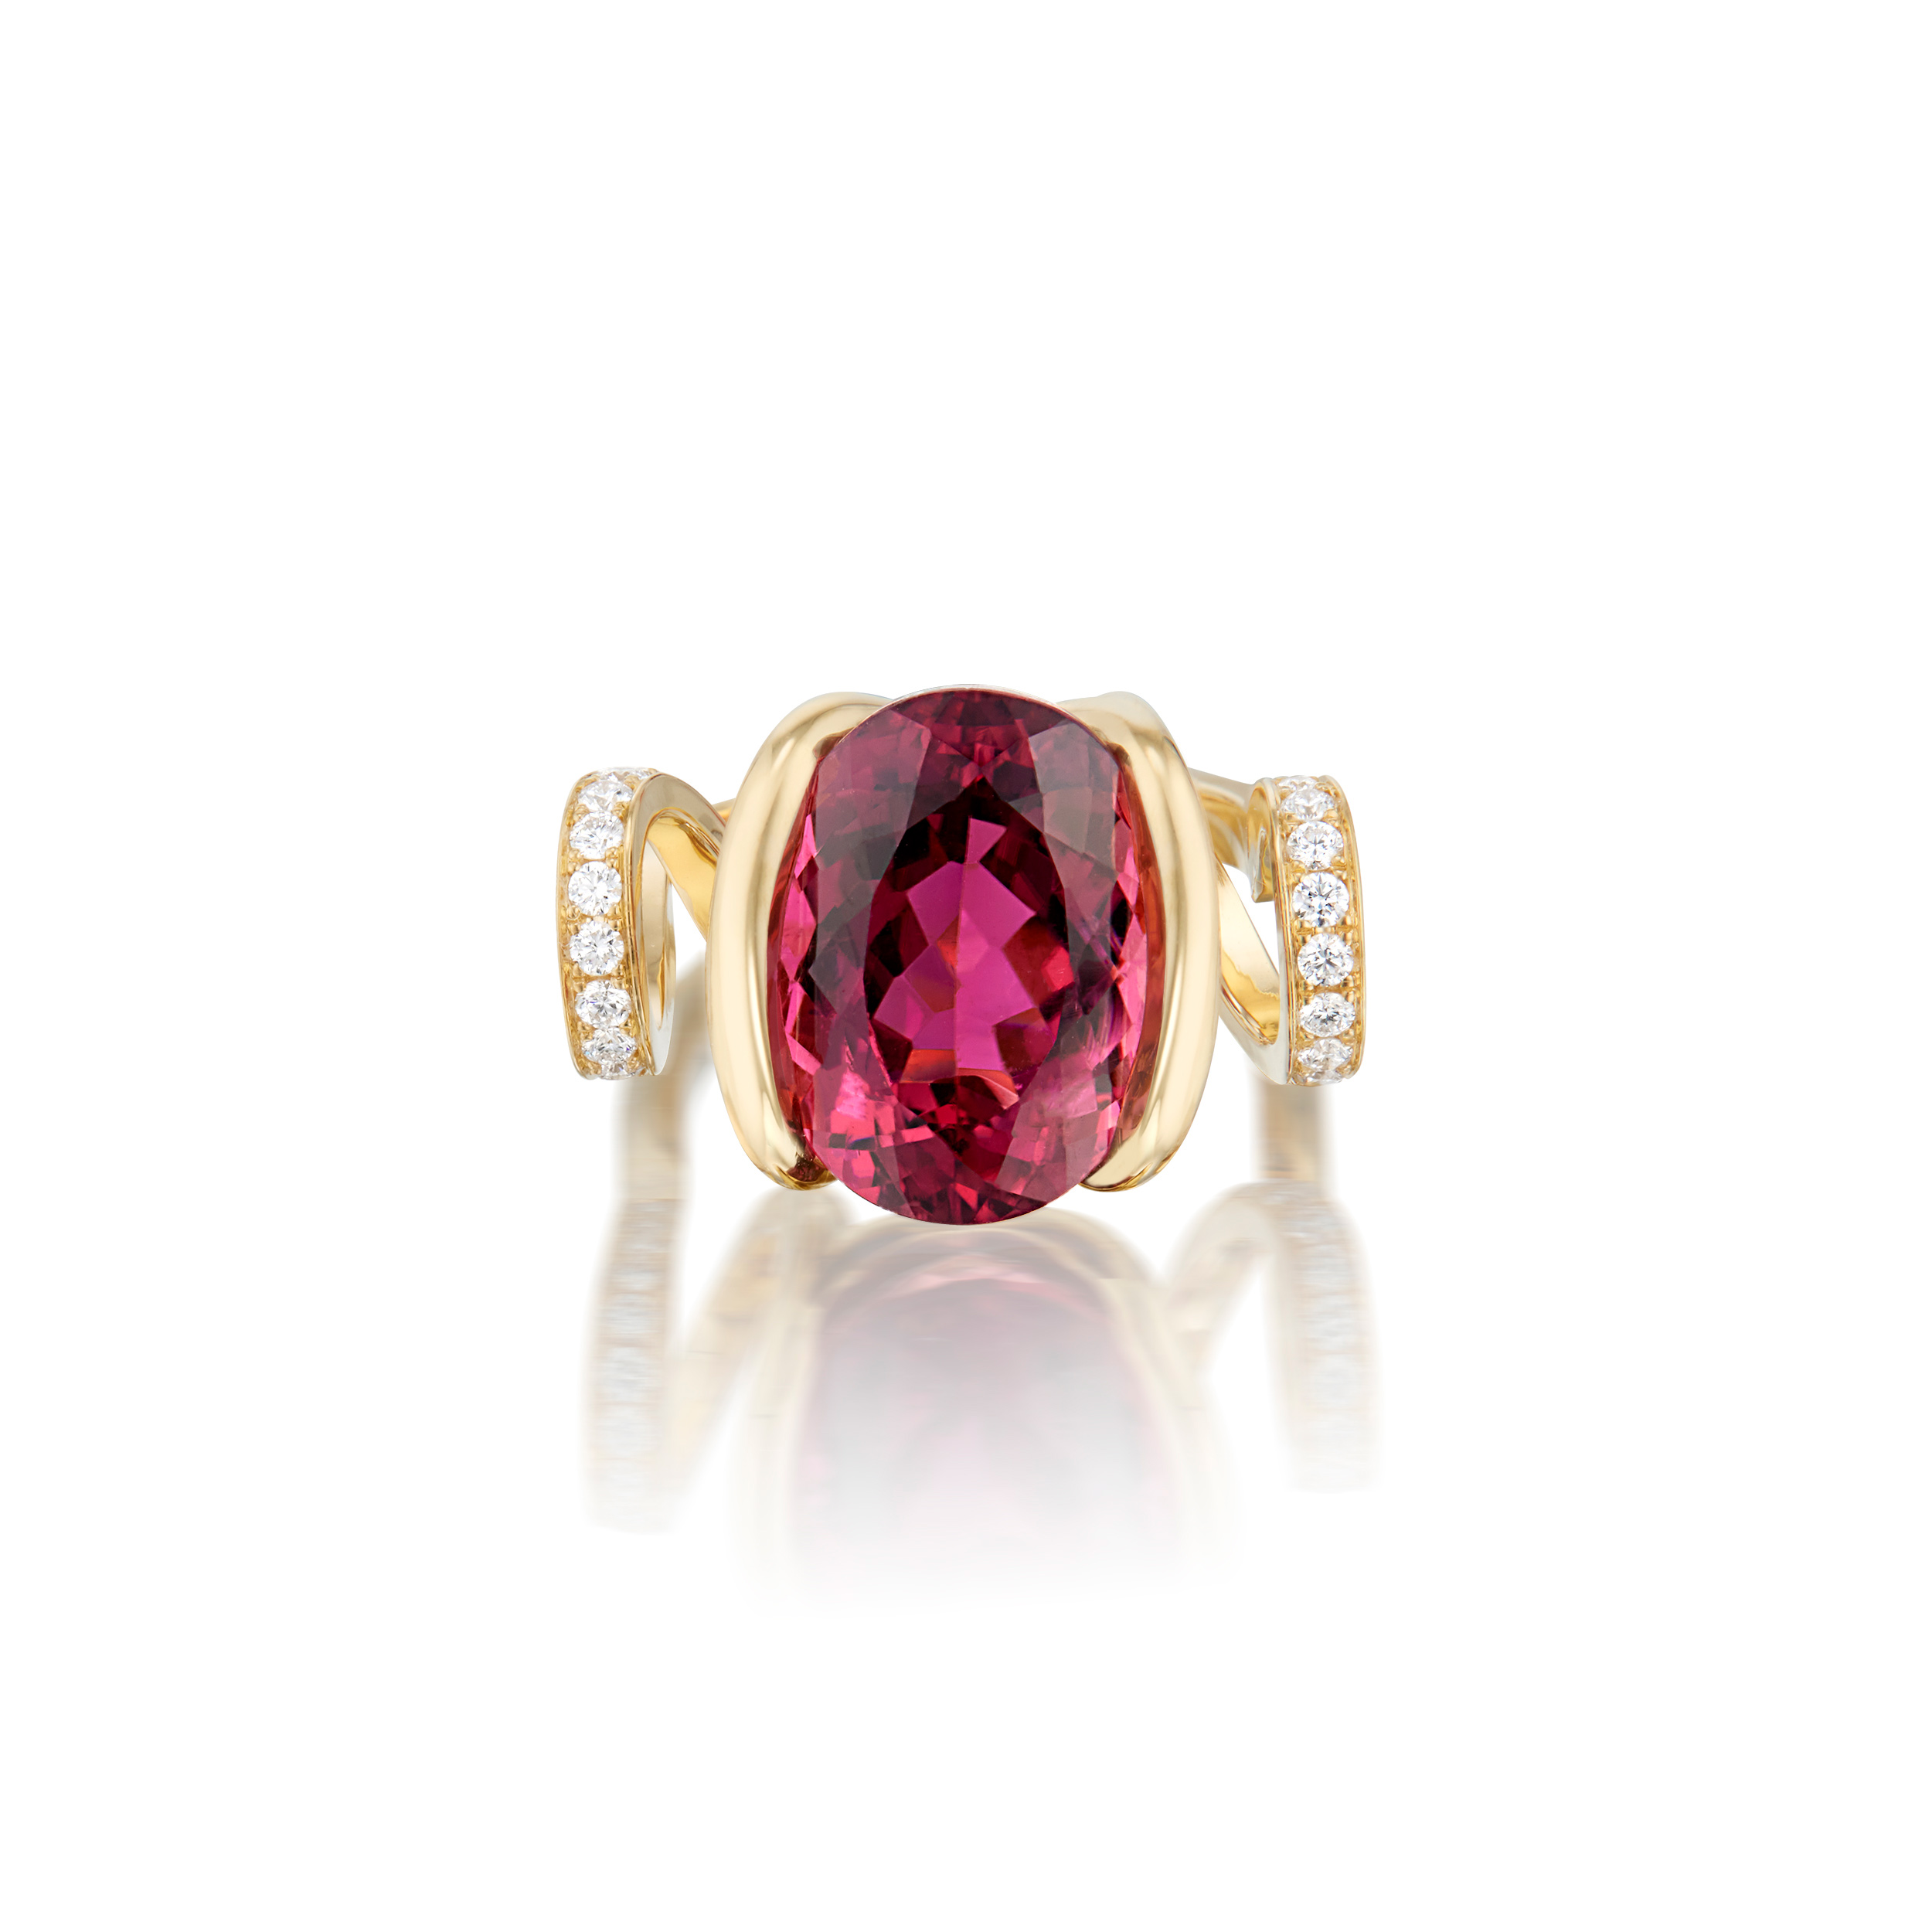 This is a front view, set down, of Renisis by Sardwell's Fire Curl Ring. Here, the gem stone can be seen clearly for size. It is a large pink tourmaline center and 18K yellow gold with pavé diamonds. Its unique design featured a curled body and setting.